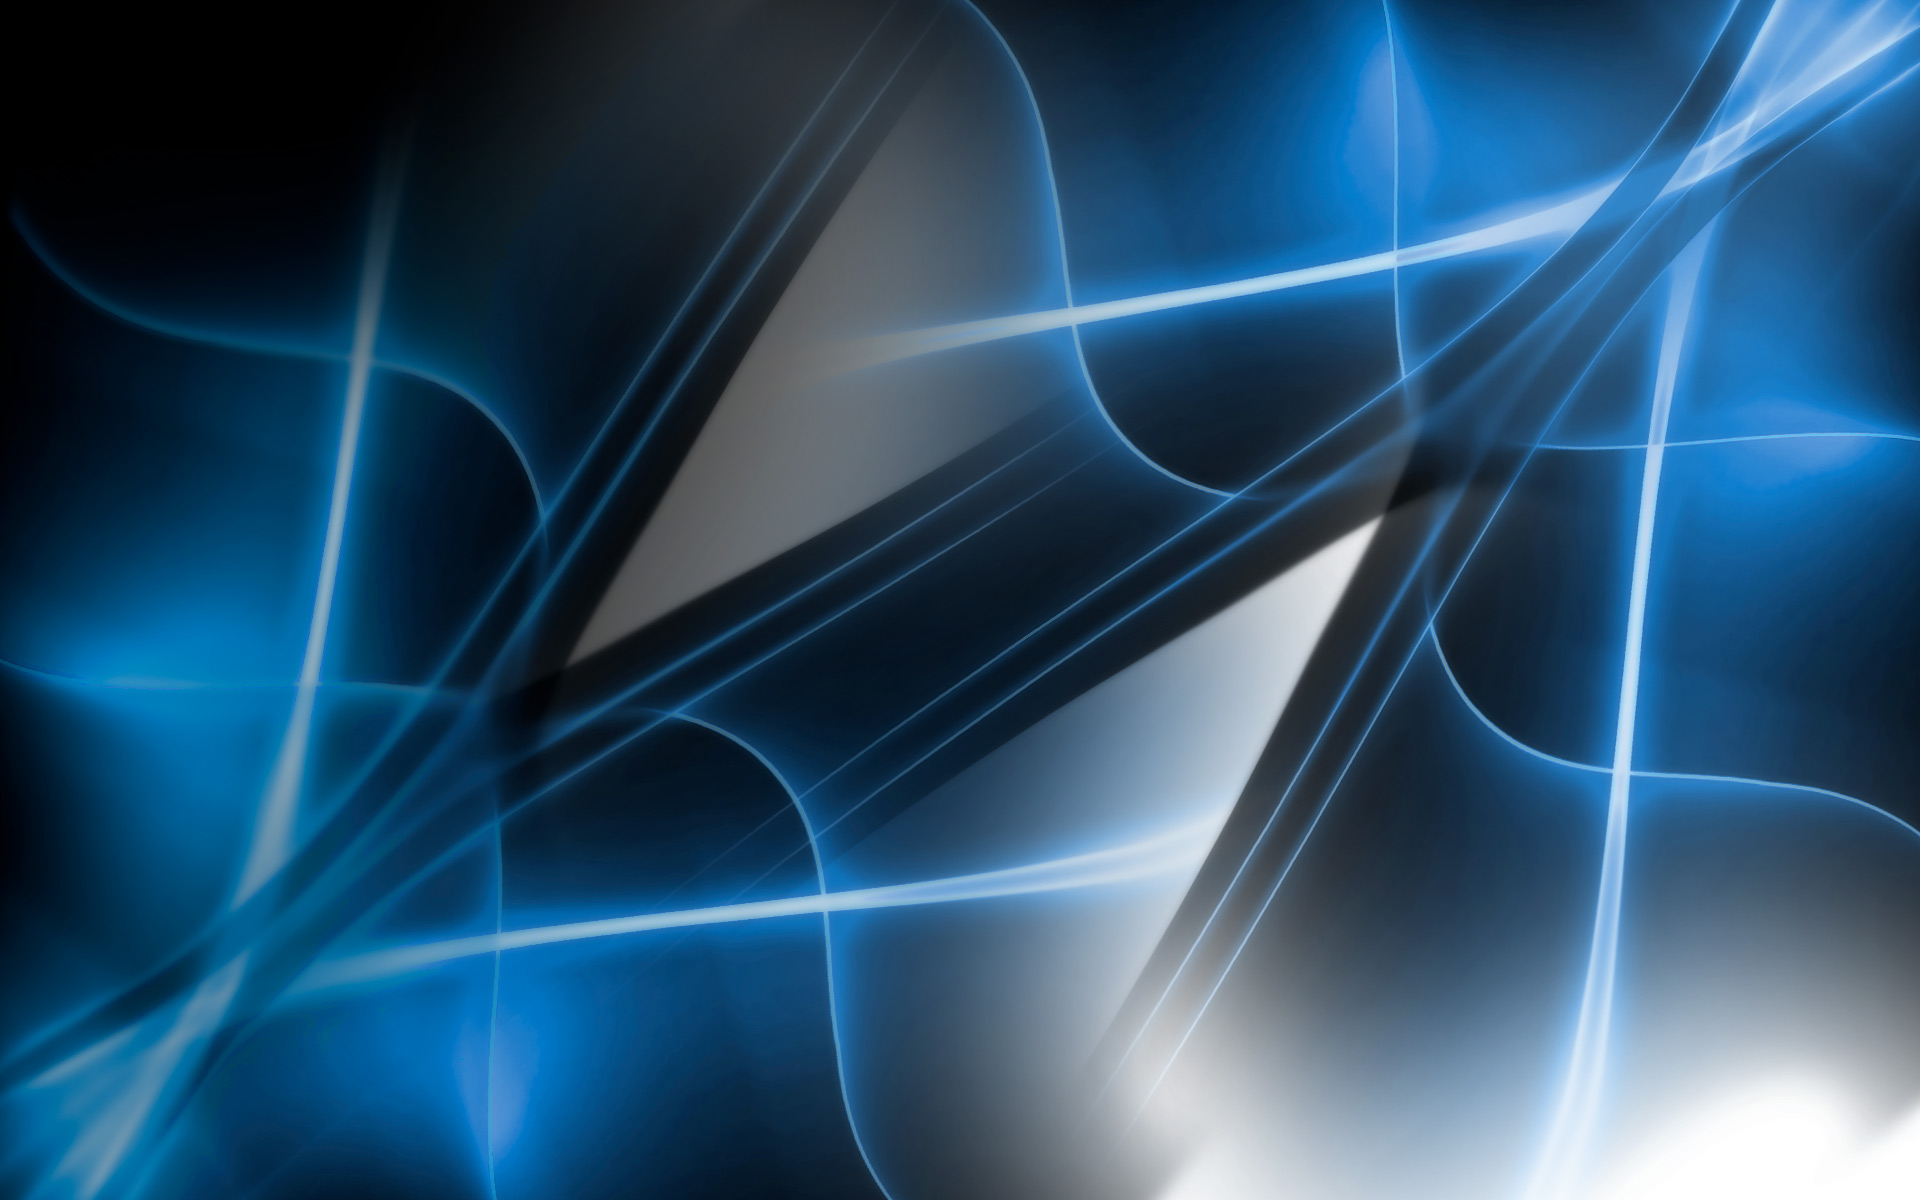 Black And Blue Abstract Wallpaper 4K - 3D Cubes Abstract Pattern Blue 4K Wallpaper - Best